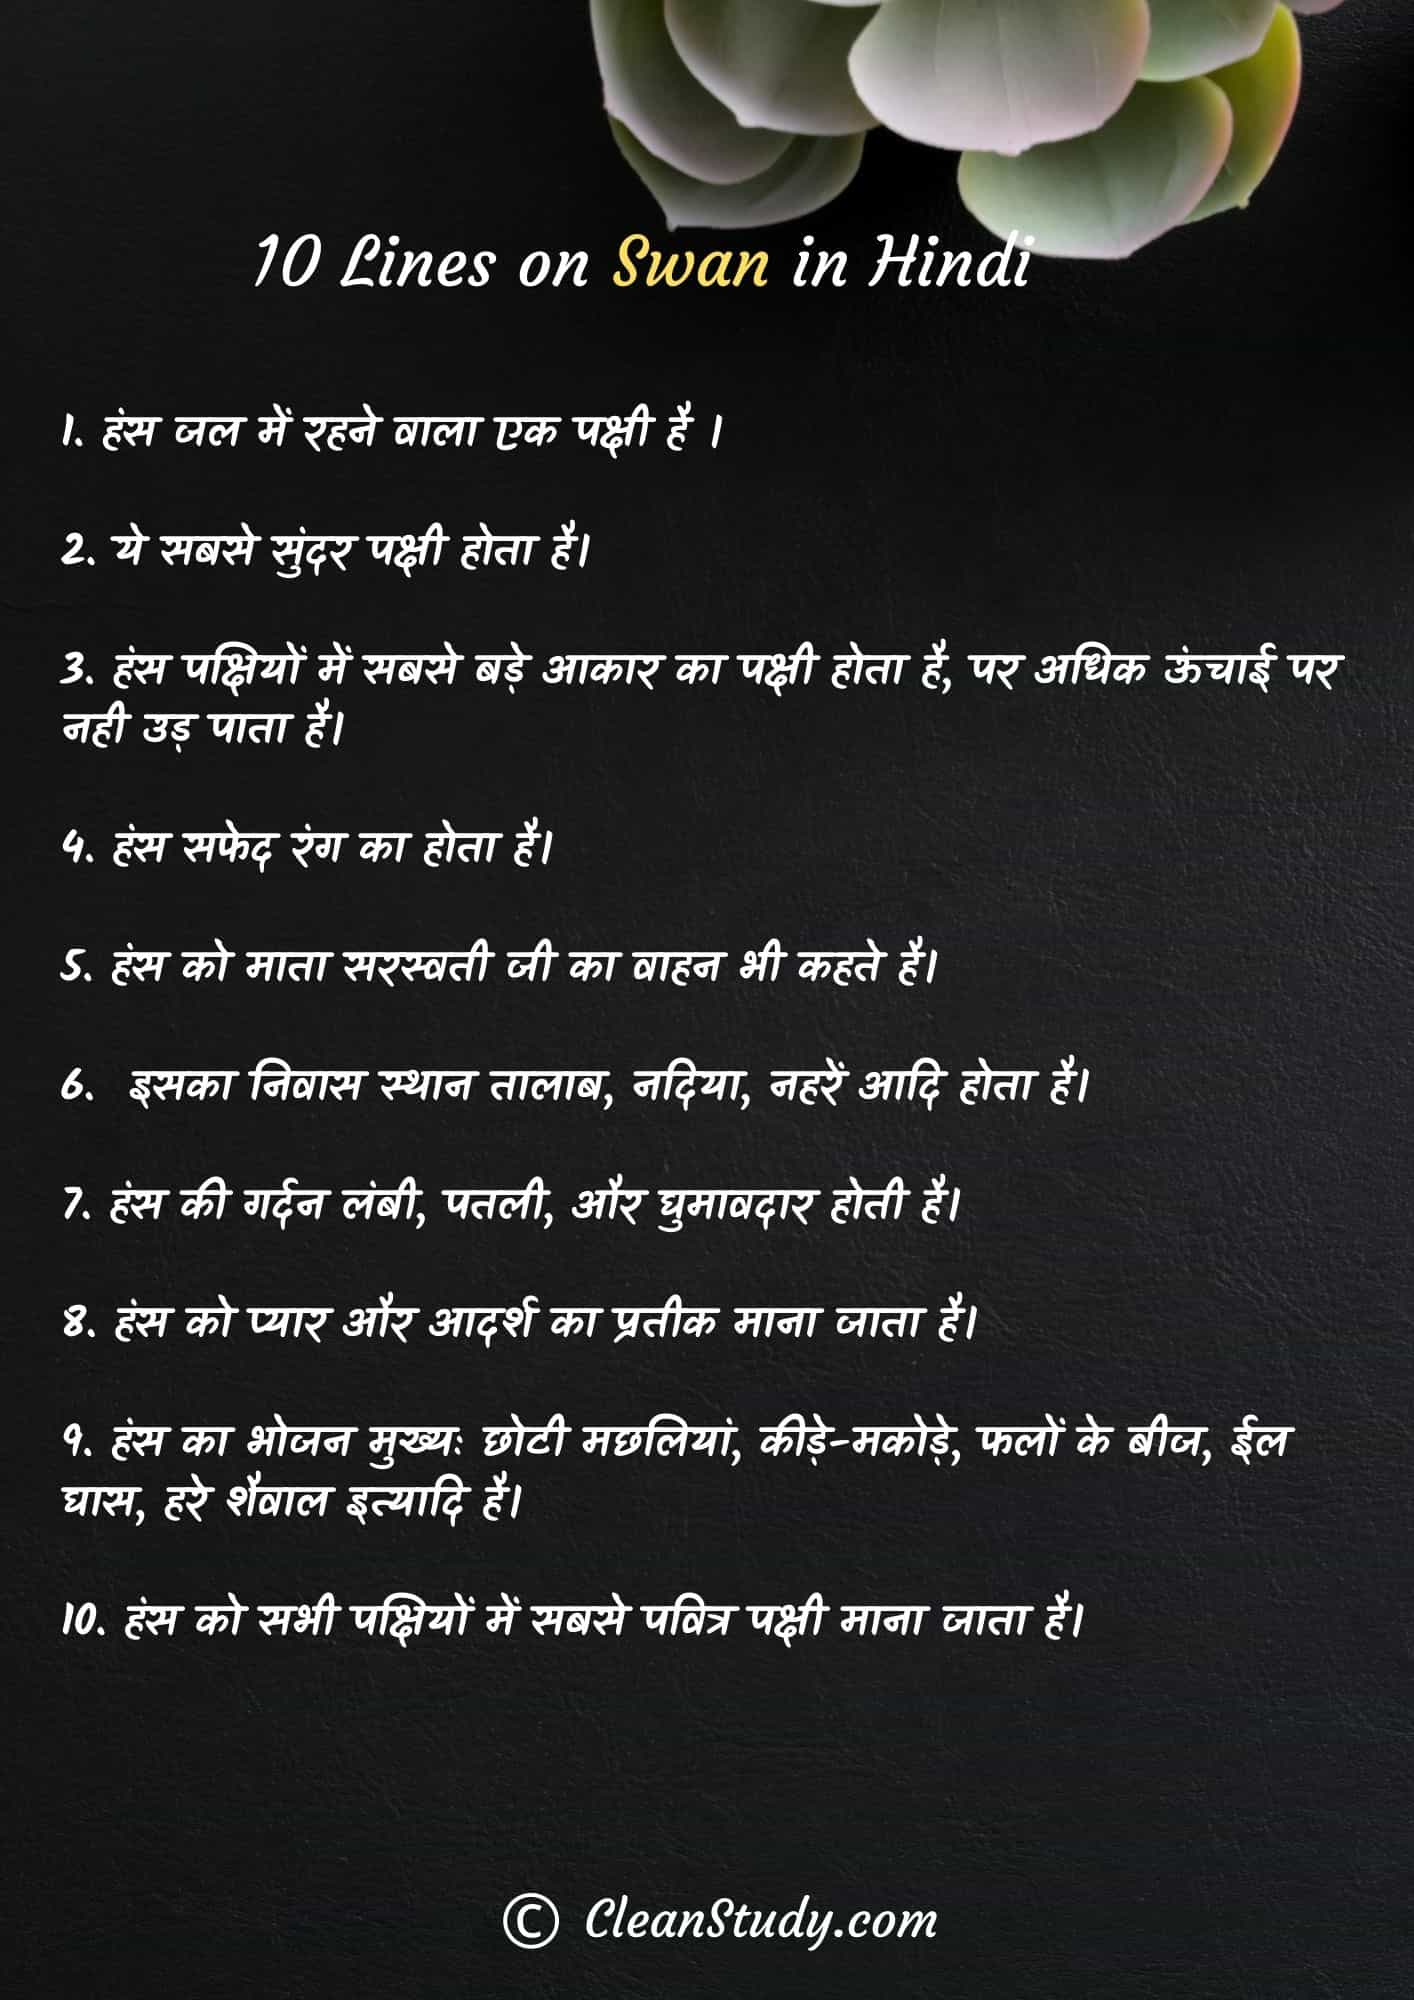 10 Lines on Swan in Hindi